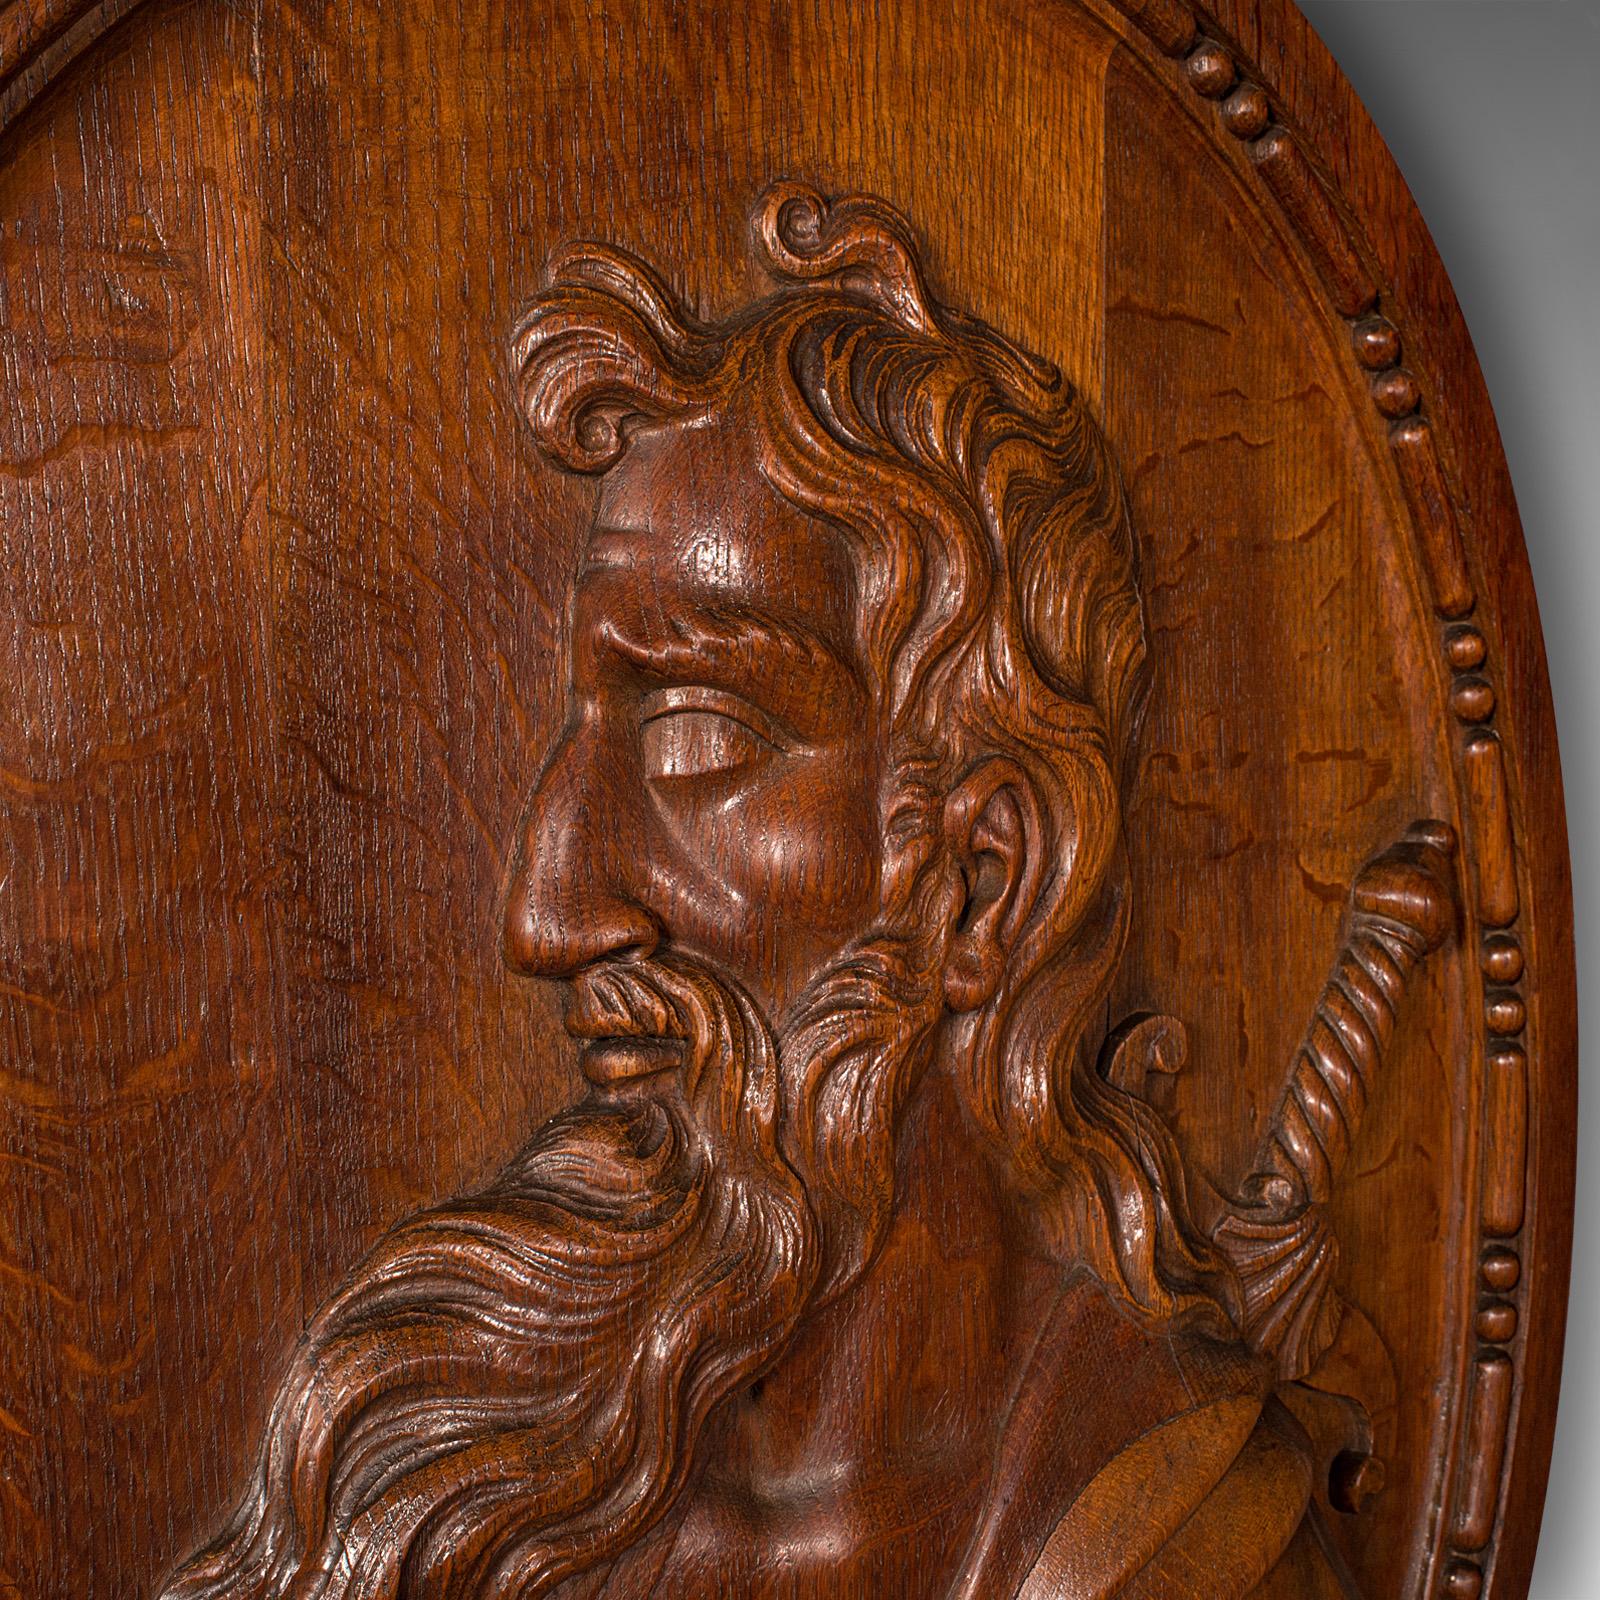 Large Antique Carved Portrait, Italian, Oak, Decorative Relief Panel, Victorian In Good Condition For Sale In Hele, Devon, GB